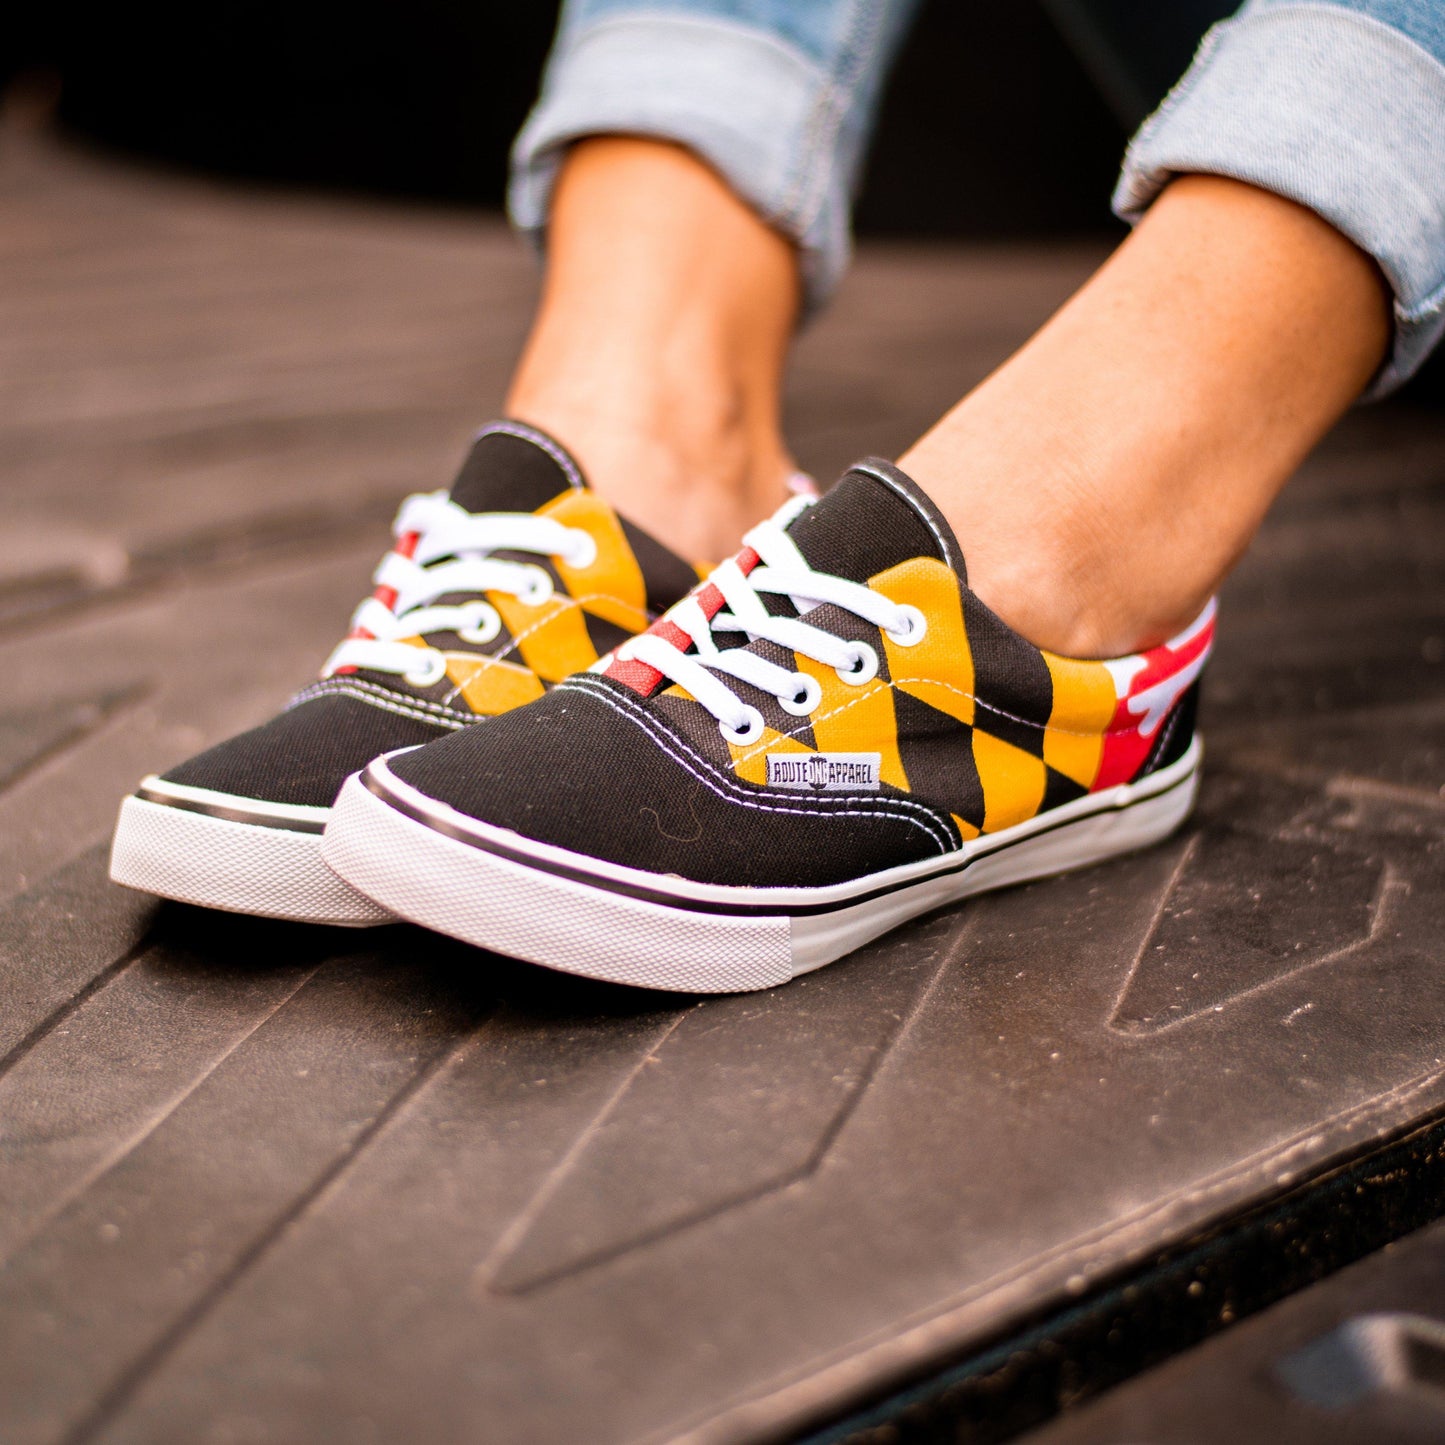 Maryland Flag (Black) / Shoes - Route One Apparel